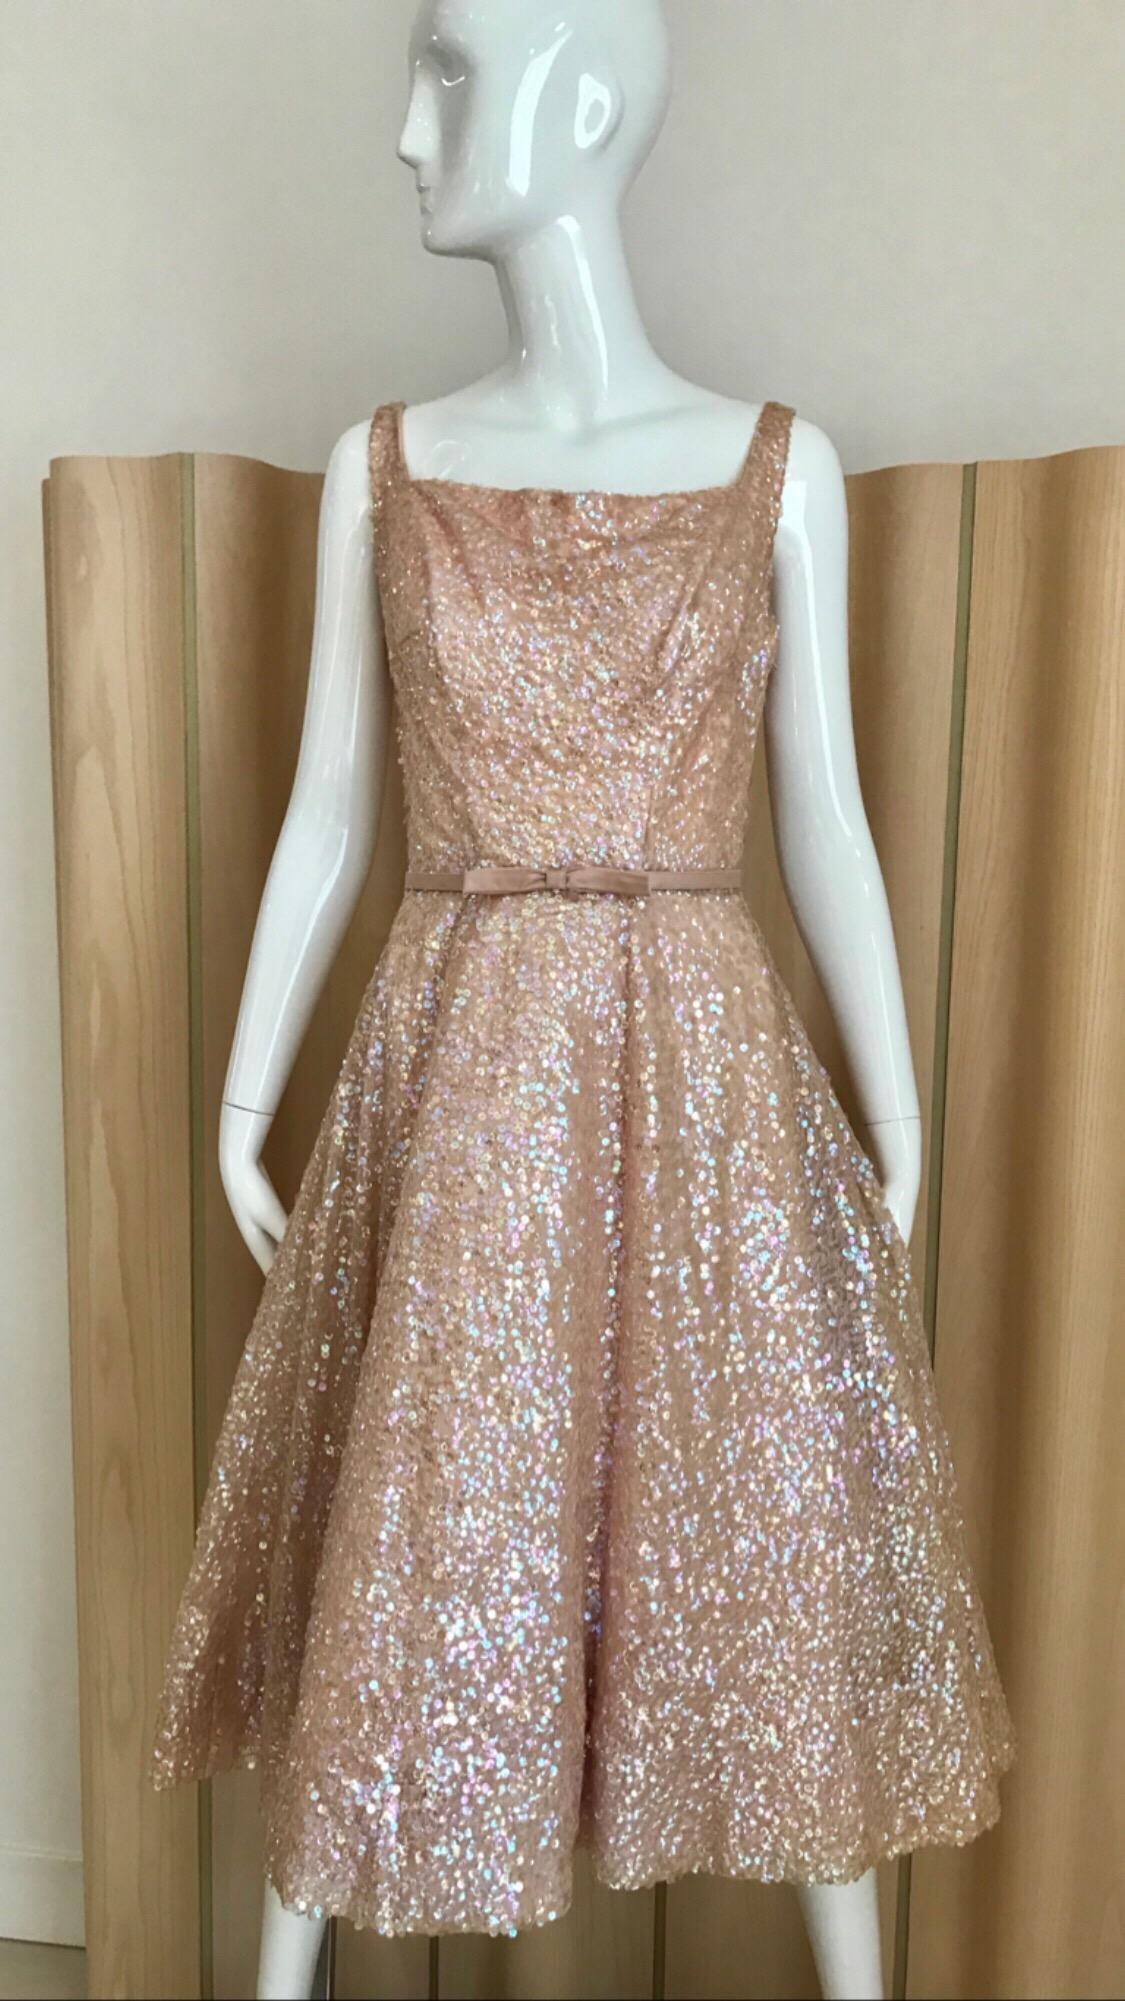 Elegant 1950s Maurice rentner light creme cocktail dress with iridescent sequin. Dress comes with silk belt. 
Size: 4 / small
Measurement: 
Bust: 34 inches / Waist : 26 inches / 
dress length: 44.5 inches